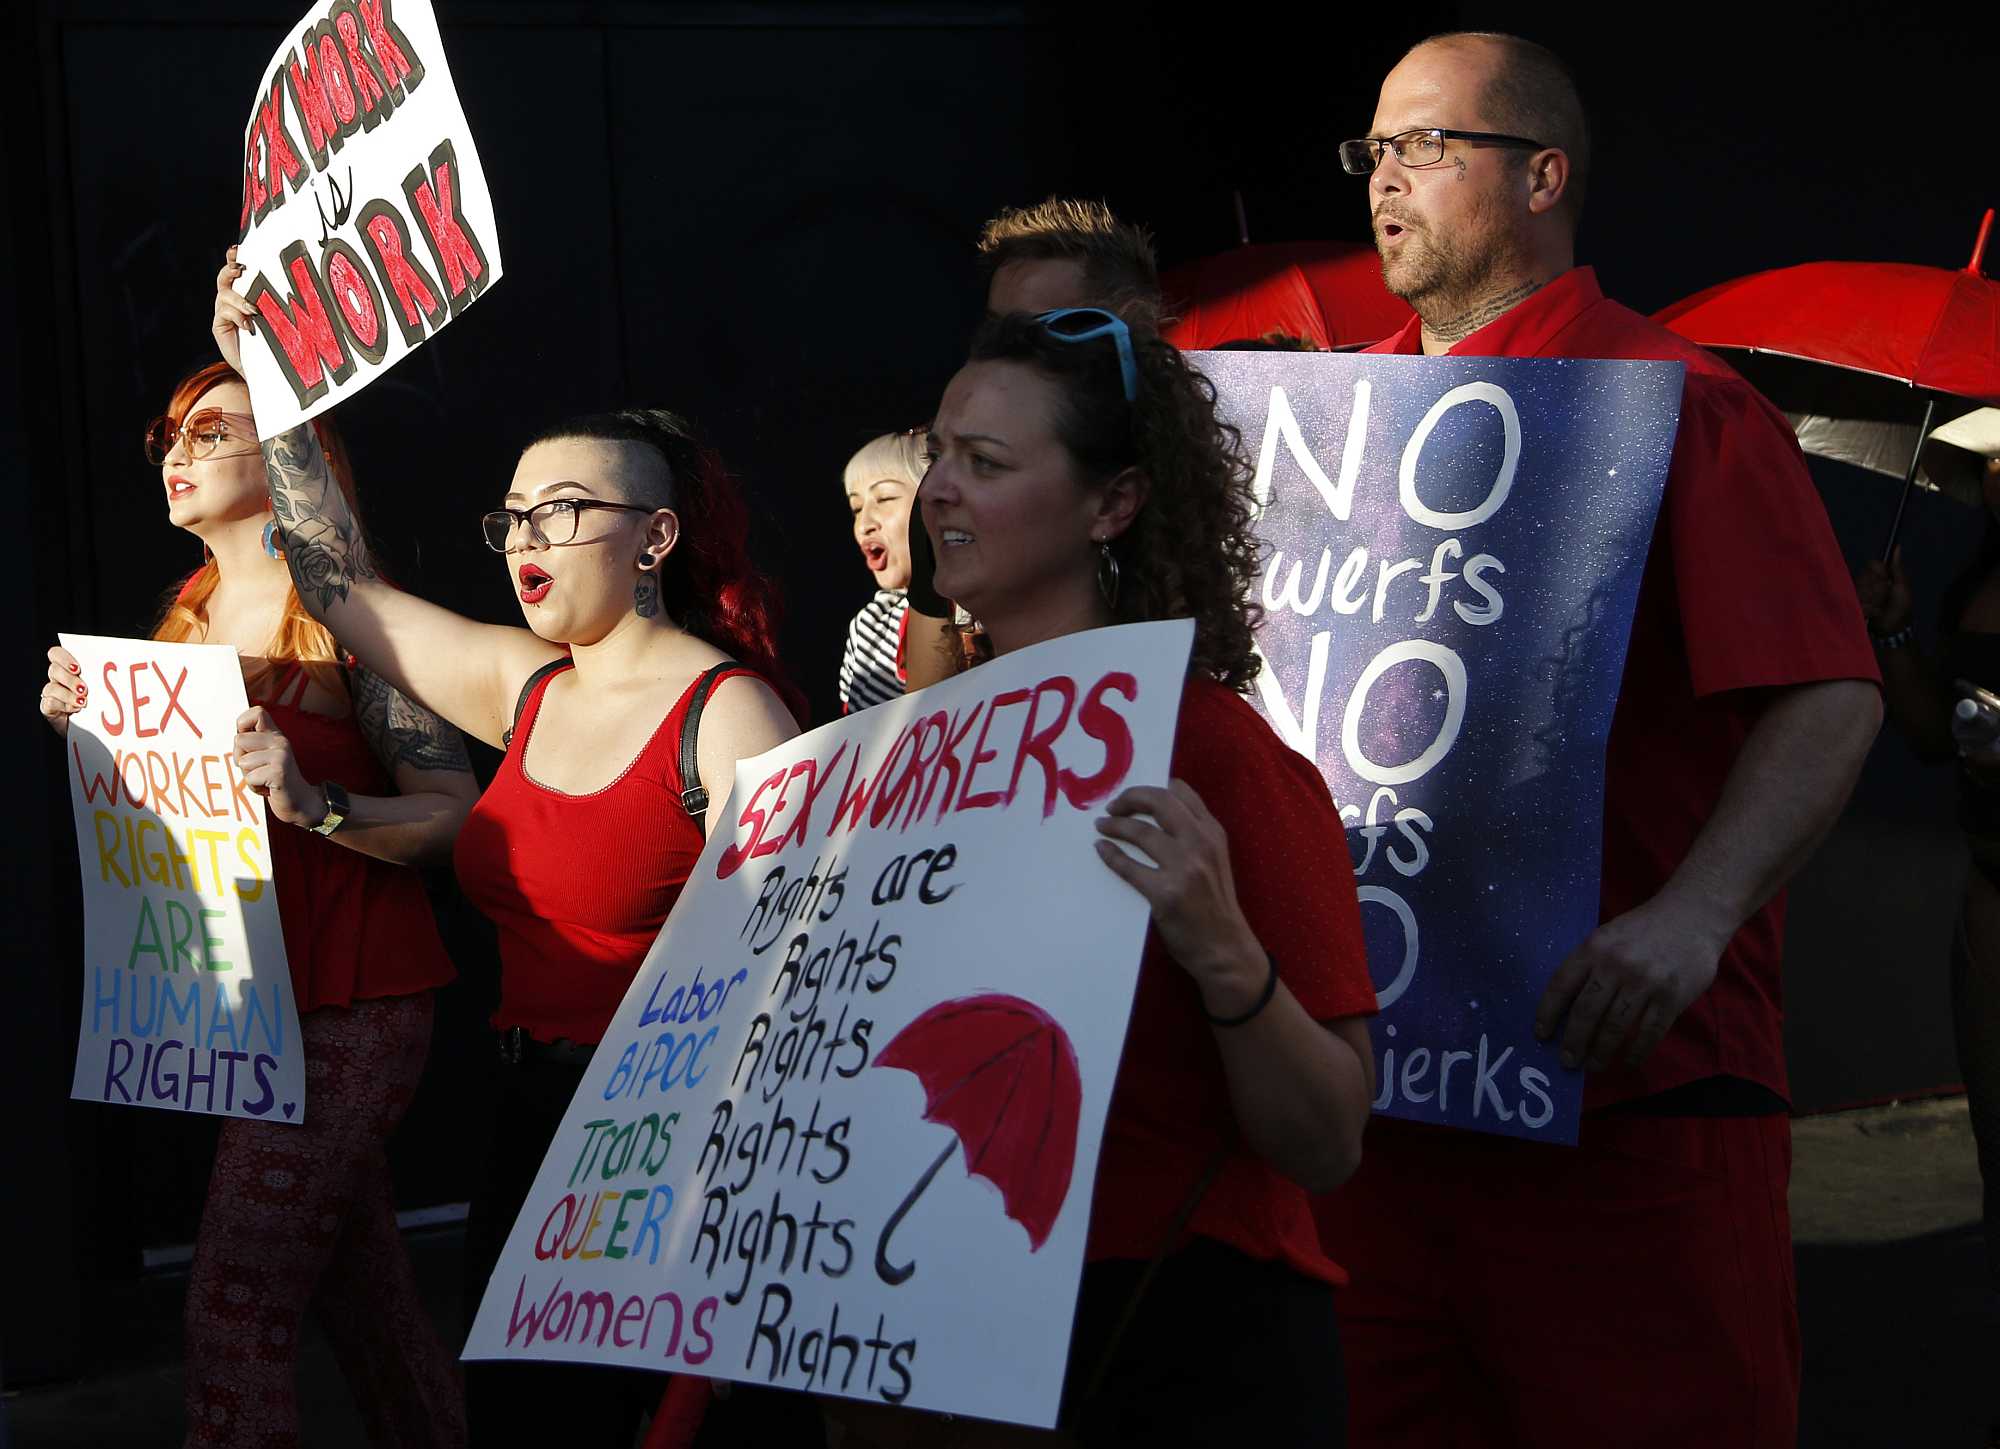 Supporters of sex workers' rights marched in Las Vegas in 2019. AP Photo/John Locher